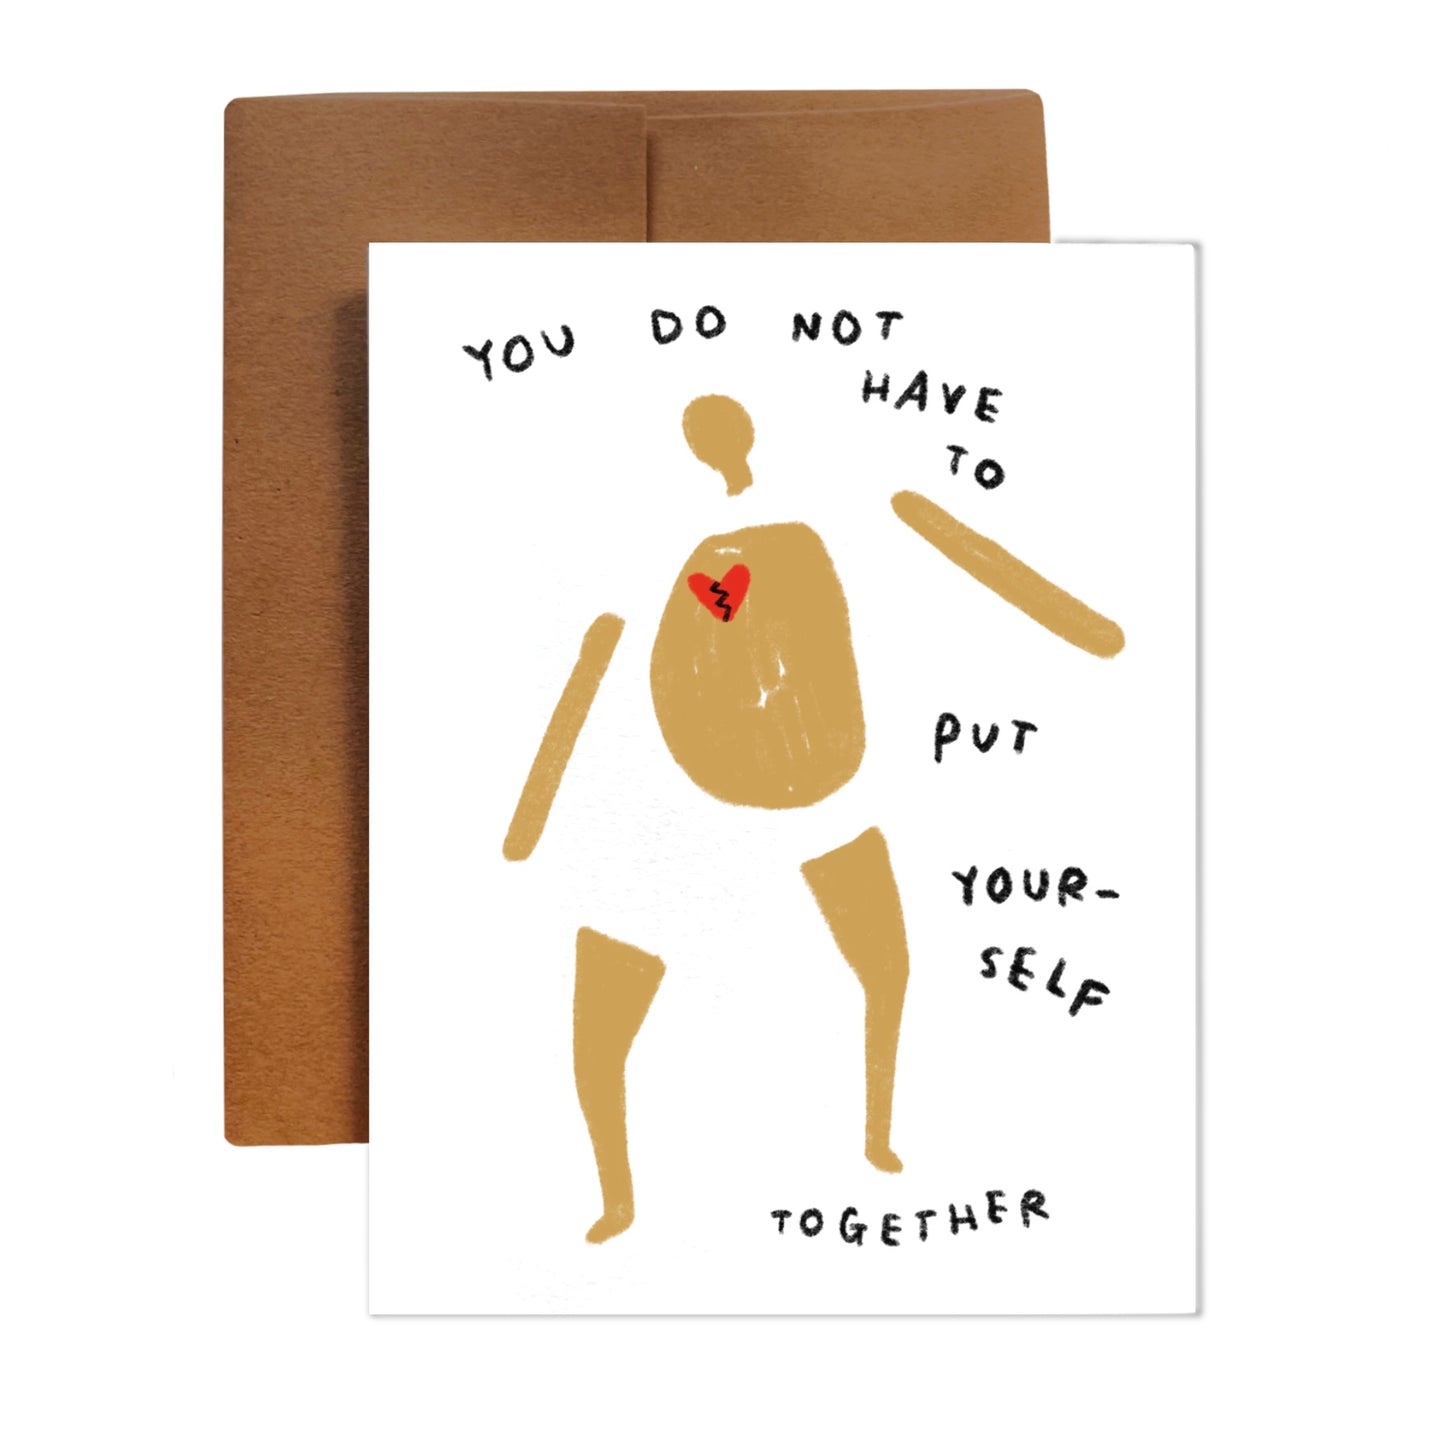 YOU DO NOT HAVE TO PUT YOURSELF TOGETHER card ~ Amy Lin X Rani Ban